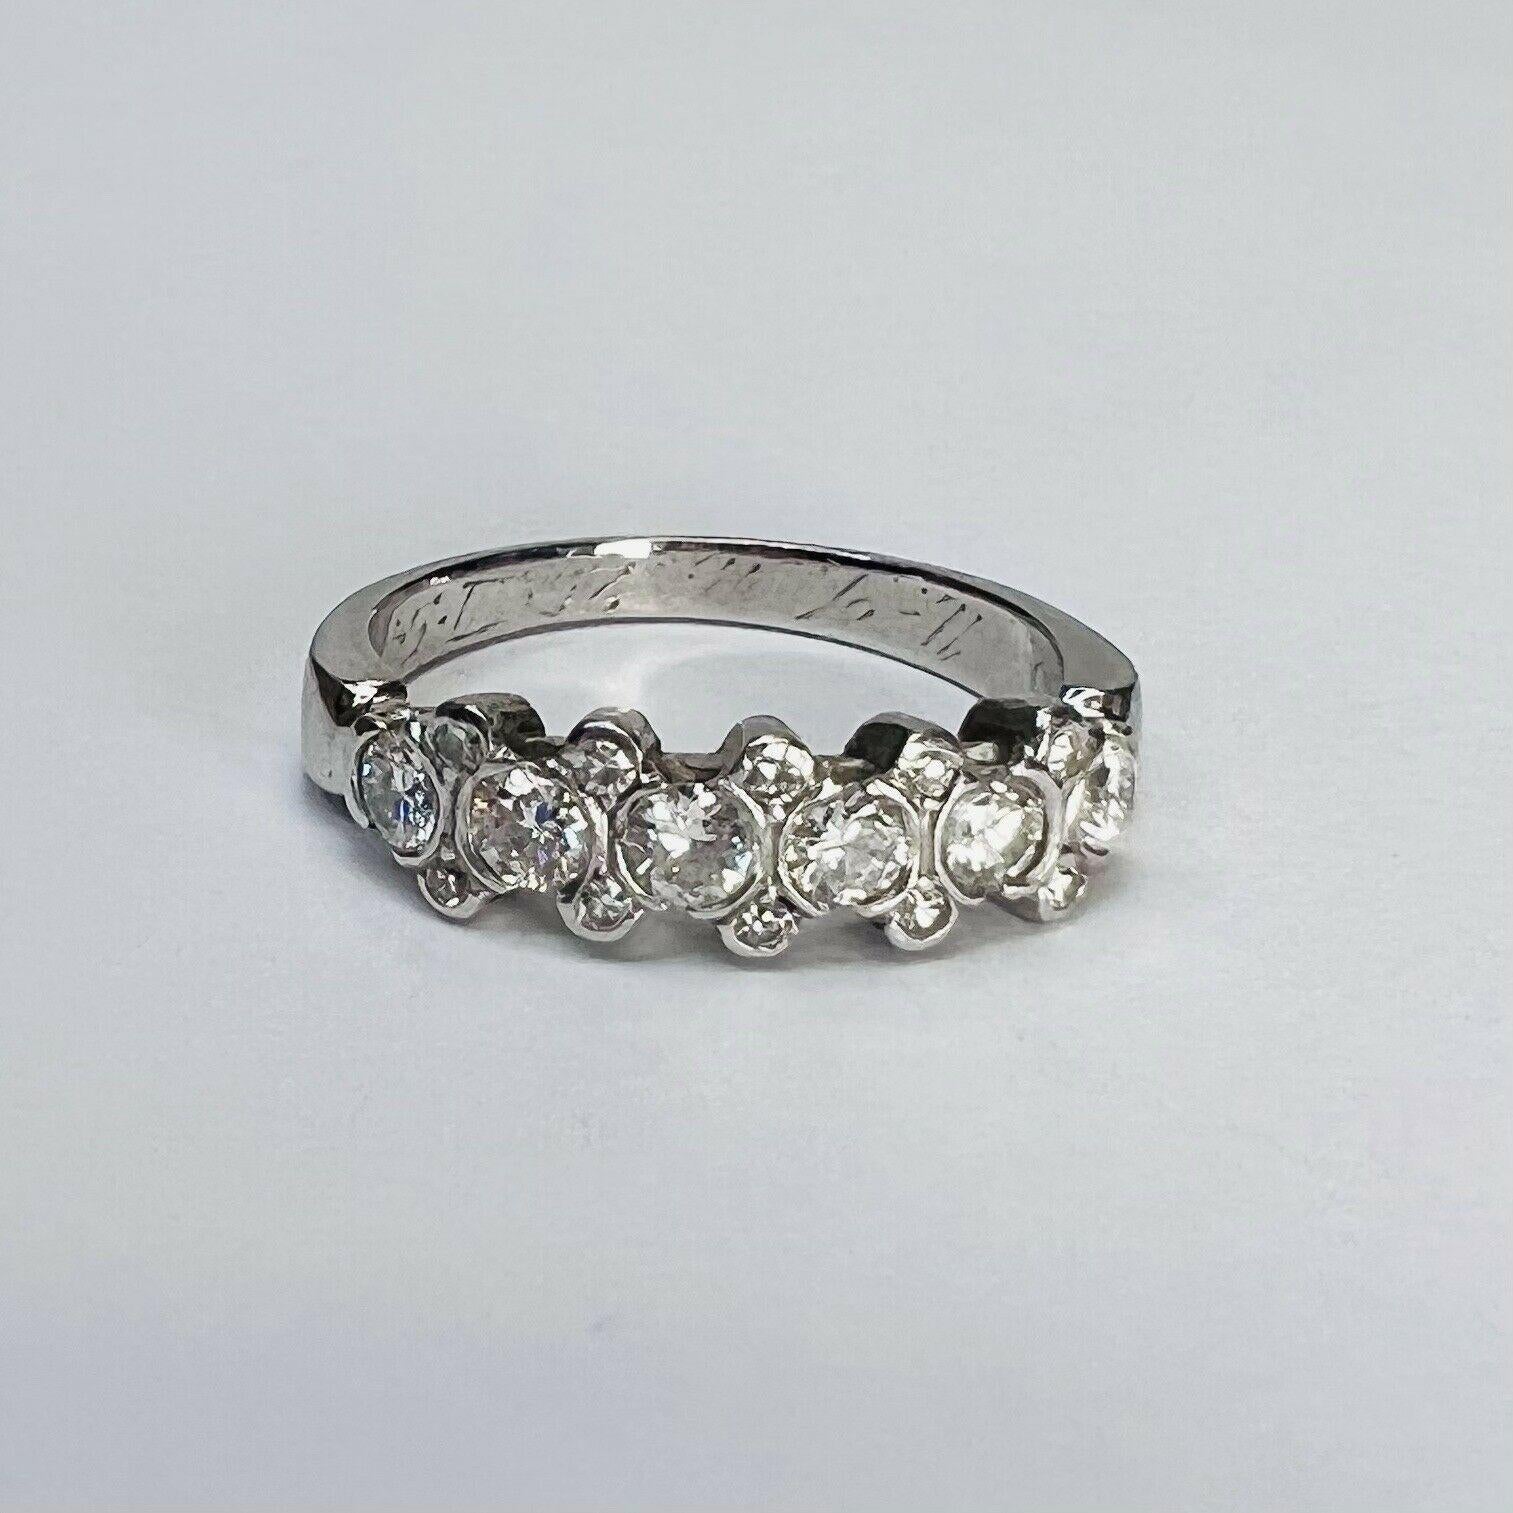 Presenting A:

Solid 18K White Gold 0.88CTW European Cut Diamonds Ring Band Size 5.5

The ring has diamonds layered in a row.

The Diamonds are natural and earth mined.

The ring is 4.5mm wide, 2mm rise and 2mm shank.

The Ring is 5mm wide, 2mm rise